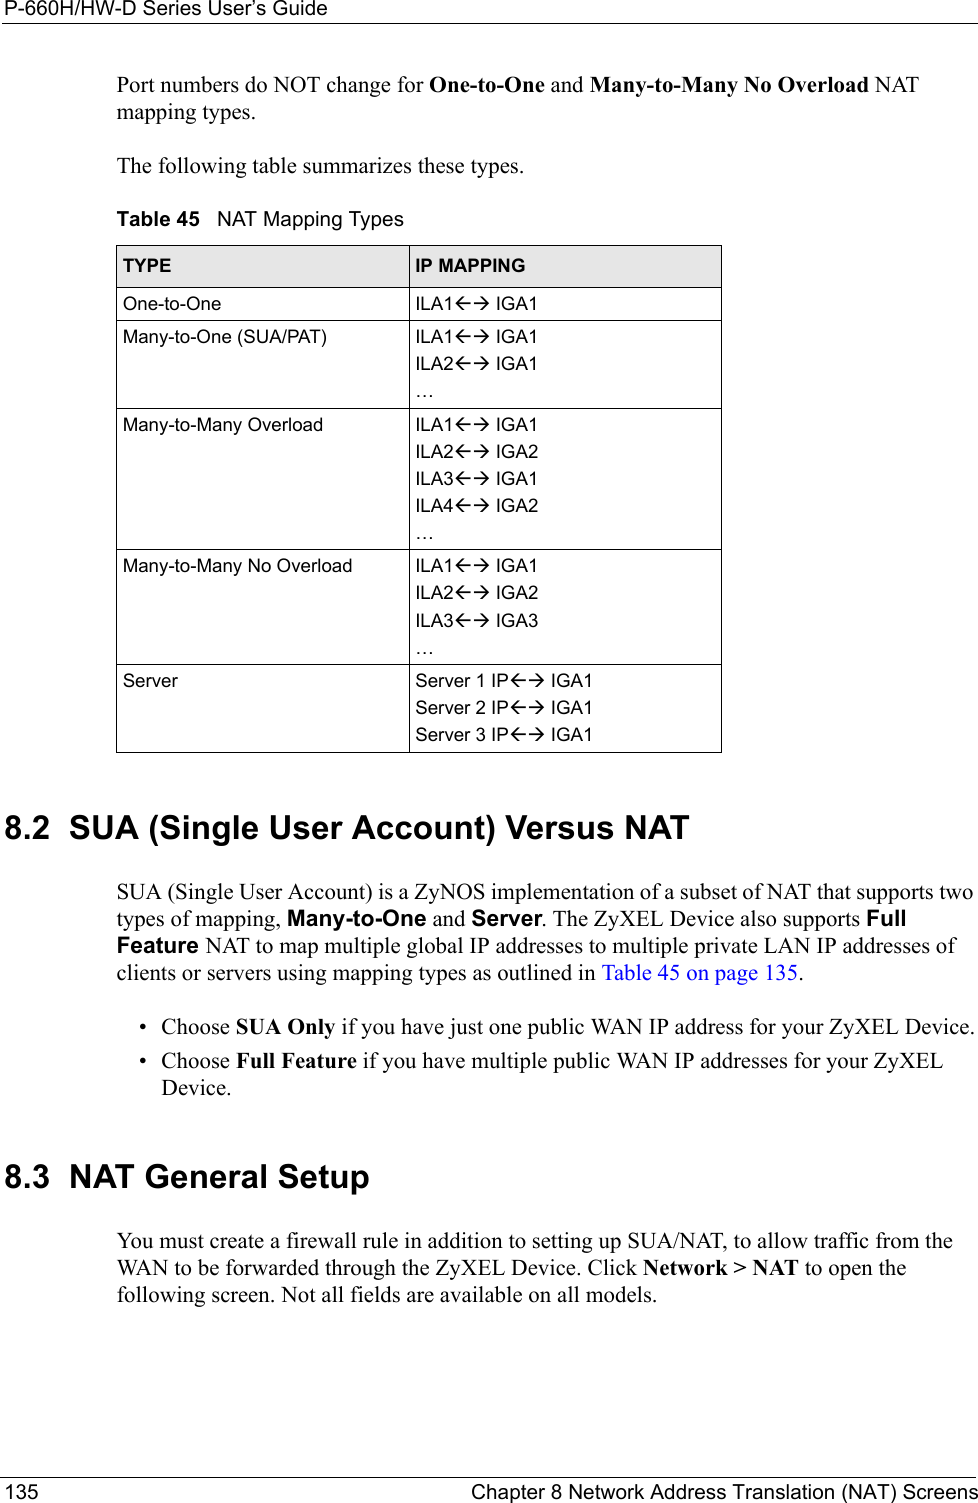 P-660H/HW-D Series User’s Guide135 Chapter 8 Network Address Translation (NAT) ScreensPort numbers do NOT change for One-to-One and Many-to-Many No Overload NAT mapping types. The following table summarizes these types.8.2  SUA (Single User Account) Versus NATSUA (Single User Account) is a ZyNOS implementation of a subset of NAT that supports two types of mapping, Many-to-One and Server. The ZyXEL Device also supports Full Feature NAT to map multiple global IP addresses to multiple private LAN IP addresses of clients or servers using mapping types as outlined in Table 45 on page 135. • Choose SUA Only if you have just one public WAN IP address for your ZyXEL Device.• Choose Full Feature if you have multiple public WAN IP addresses for your ZyXEL Device.8.3  NAT General Setup You must create a firewall rule in addition to setting up SUA/NAT, to allow traffic from the WAN to be forwarded through the ZyXEL Device. Click Network &gt; NAT to open the following screen. Not all fields are available on all models.Table 45   NAT Mapping TypesTYPE IP MAPPINGOne-to-One ILA1ÅÆ IGA1Many-to-One (SUA/PAT) ILA1ÅÆ IGA1ILA2ÅÆ IGA1…Many-to-Many Overload ILA1ÅÆ IGA1ILA2ÅÆ IGA2ILA3ÅÆ IGA1ILA4ÅÆ IGA2…Many-to-Many No Overload ILA1ÅÆ IGA1ILA2ÅÆ IGA2ILA3ÅÆ IGA3…Server Server 1 IPÅÆ IGA1Server 2 IPÅÆ IGA1Server 3 IPÅÆ IGA1